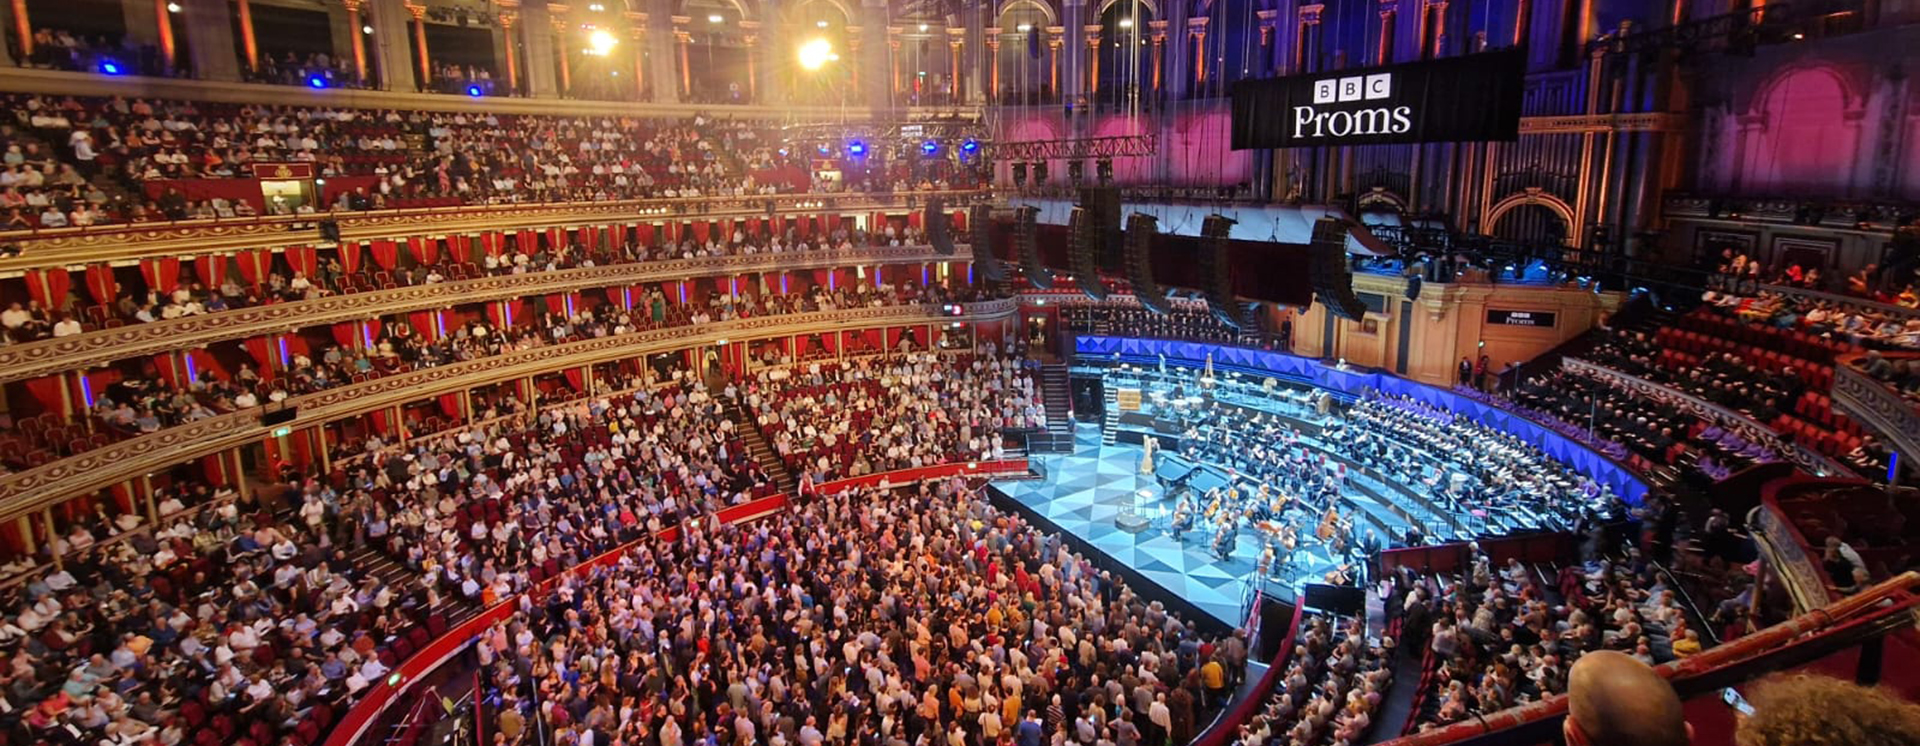 A photo of a performance at the BBC Proms